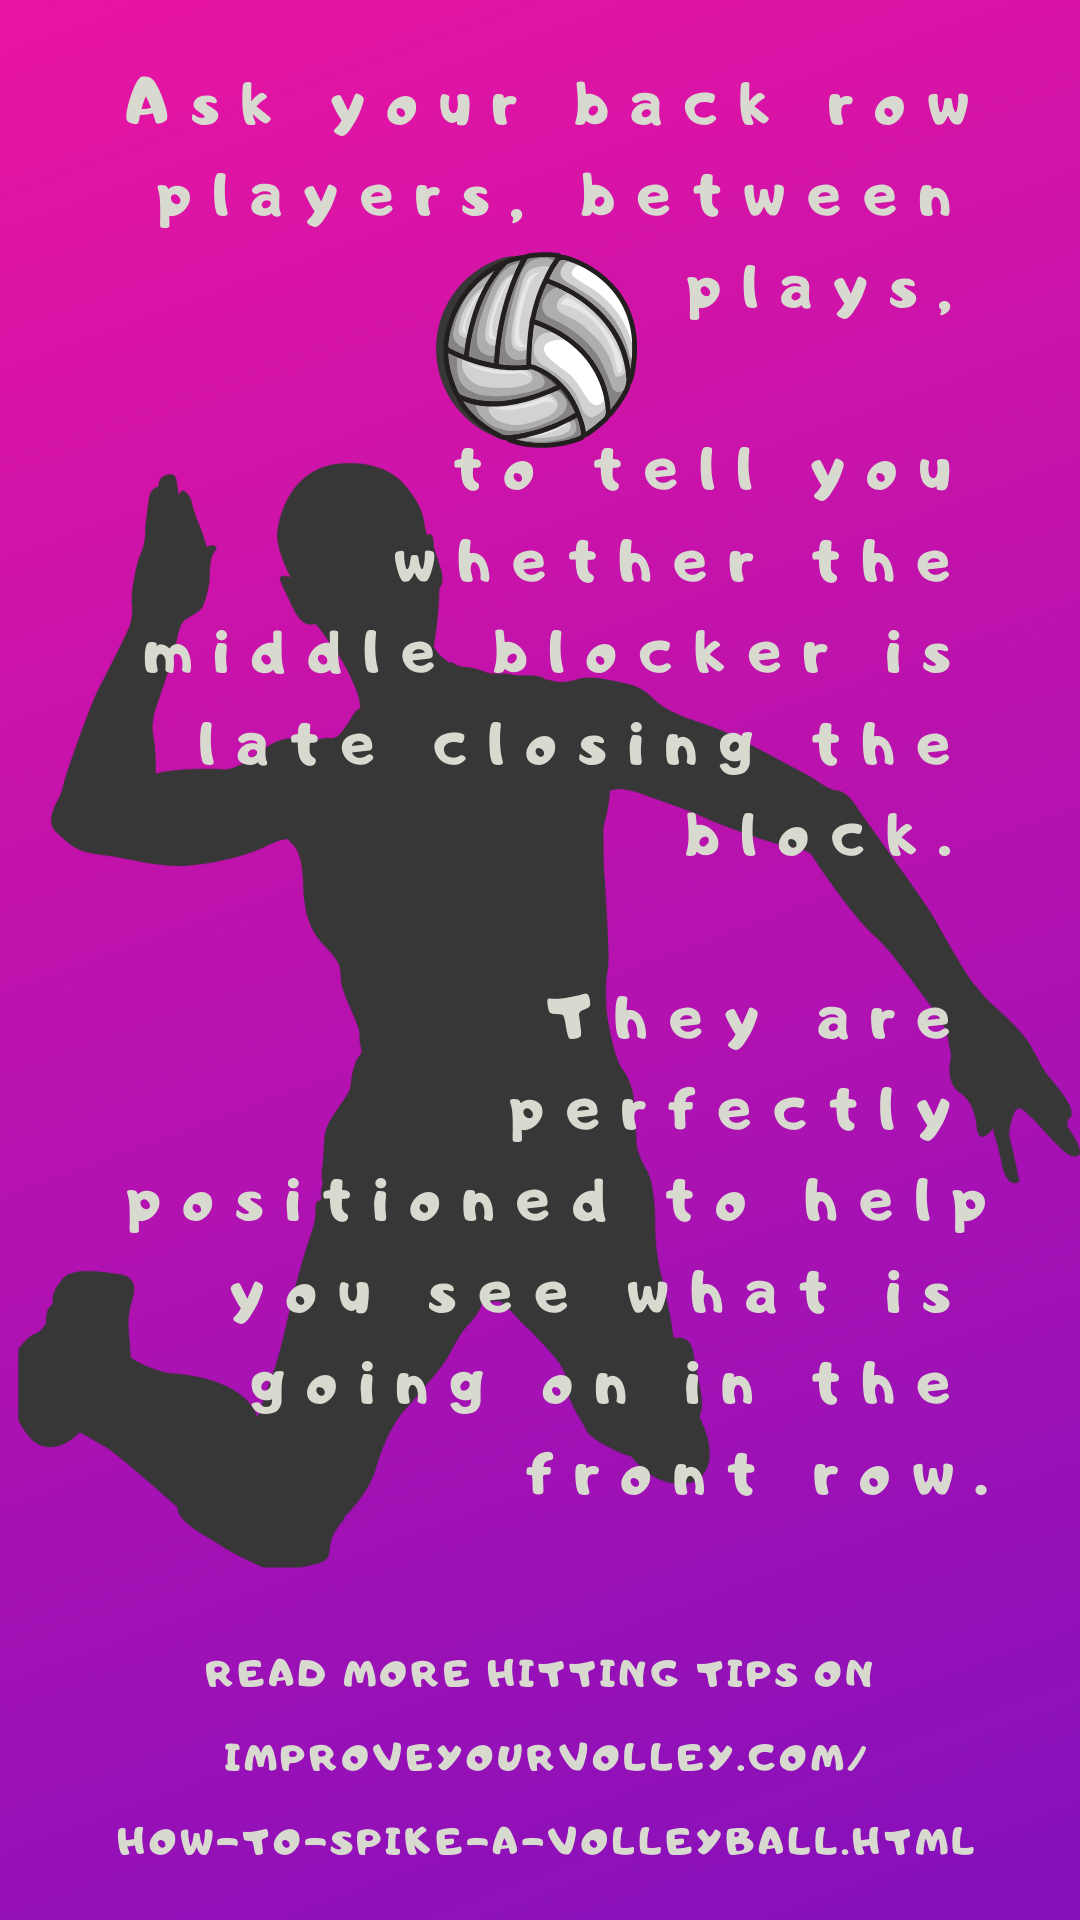 Ask your back row players, between plays, to tell you whether the middle blocker is late closing the block. They are perfectly positioned to help you see what is going on in the front row.  .